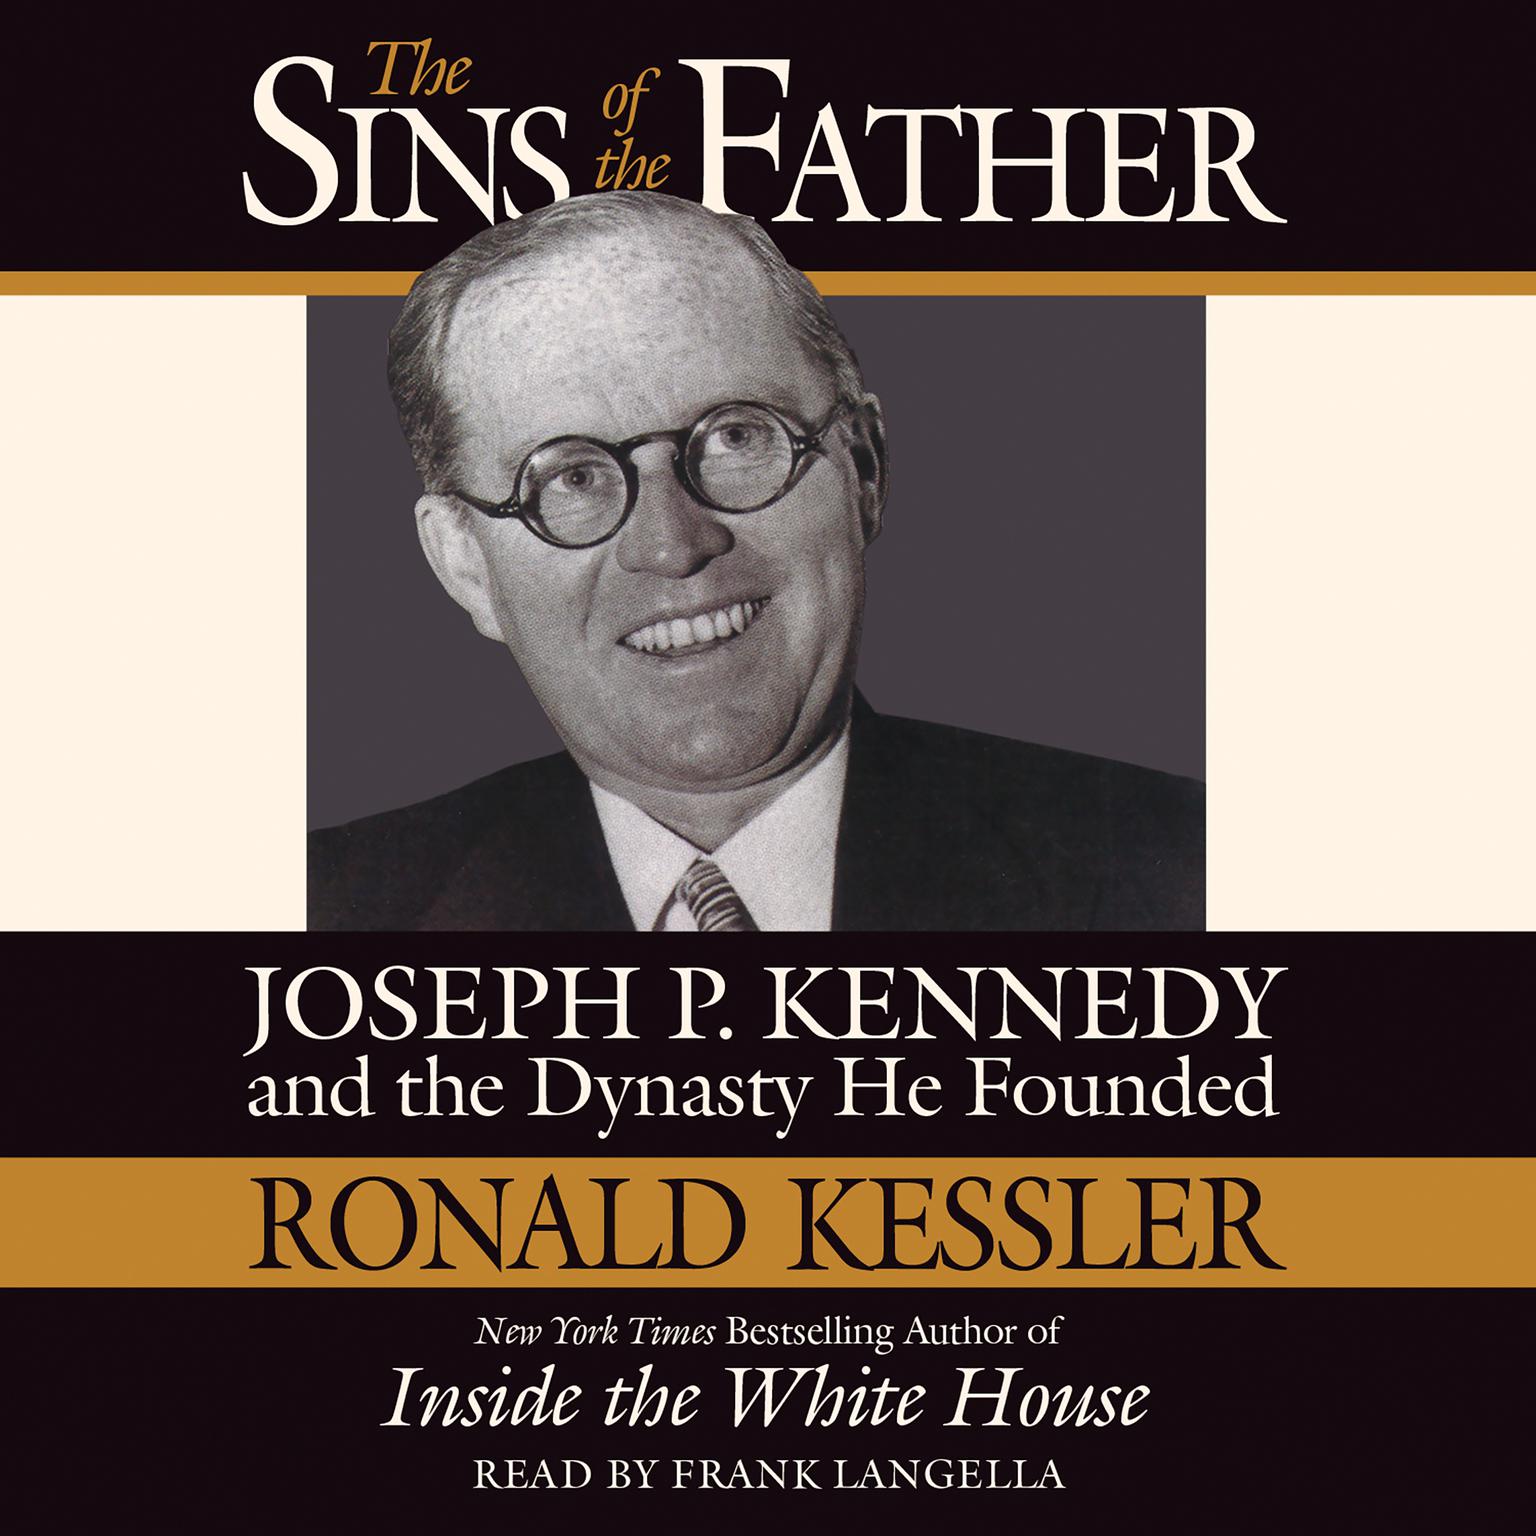 The Sins of the Father (Abridged): Joseph P. Kennedy and the Dynasty He Founded Audiobook, by Ronald Kessler